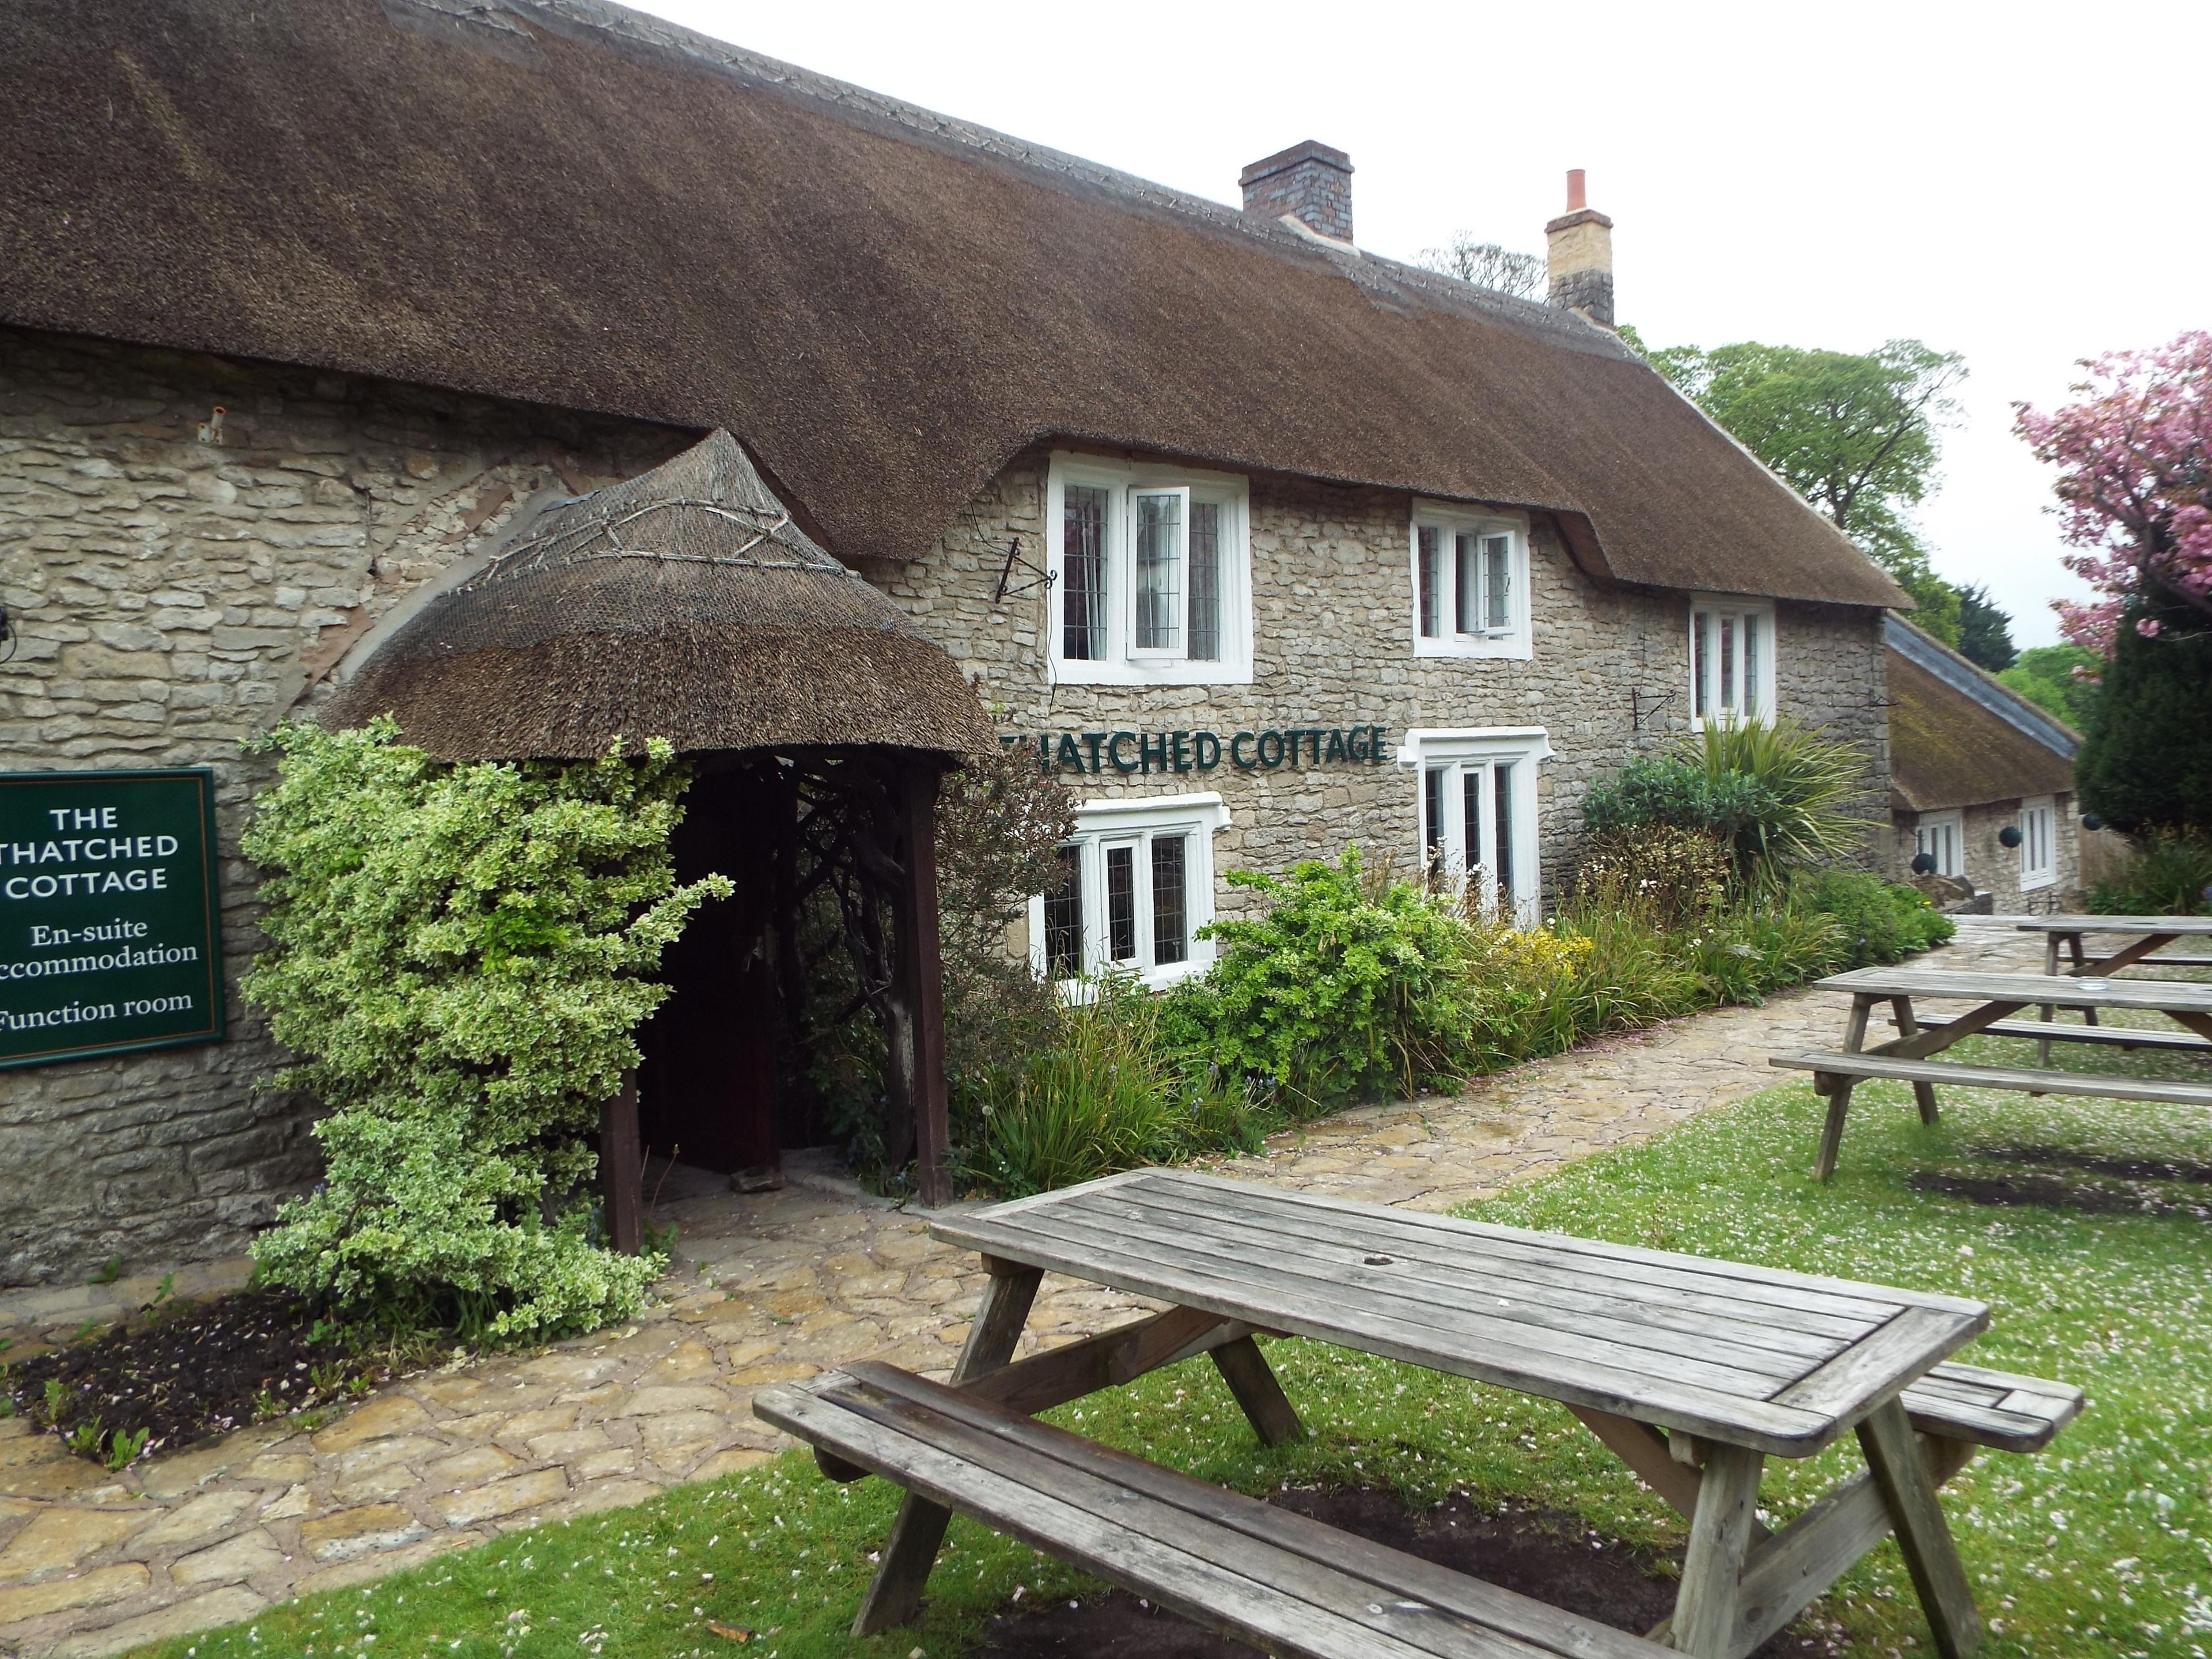 The Thatched Cottage Inn, Upper restaurant photo #1